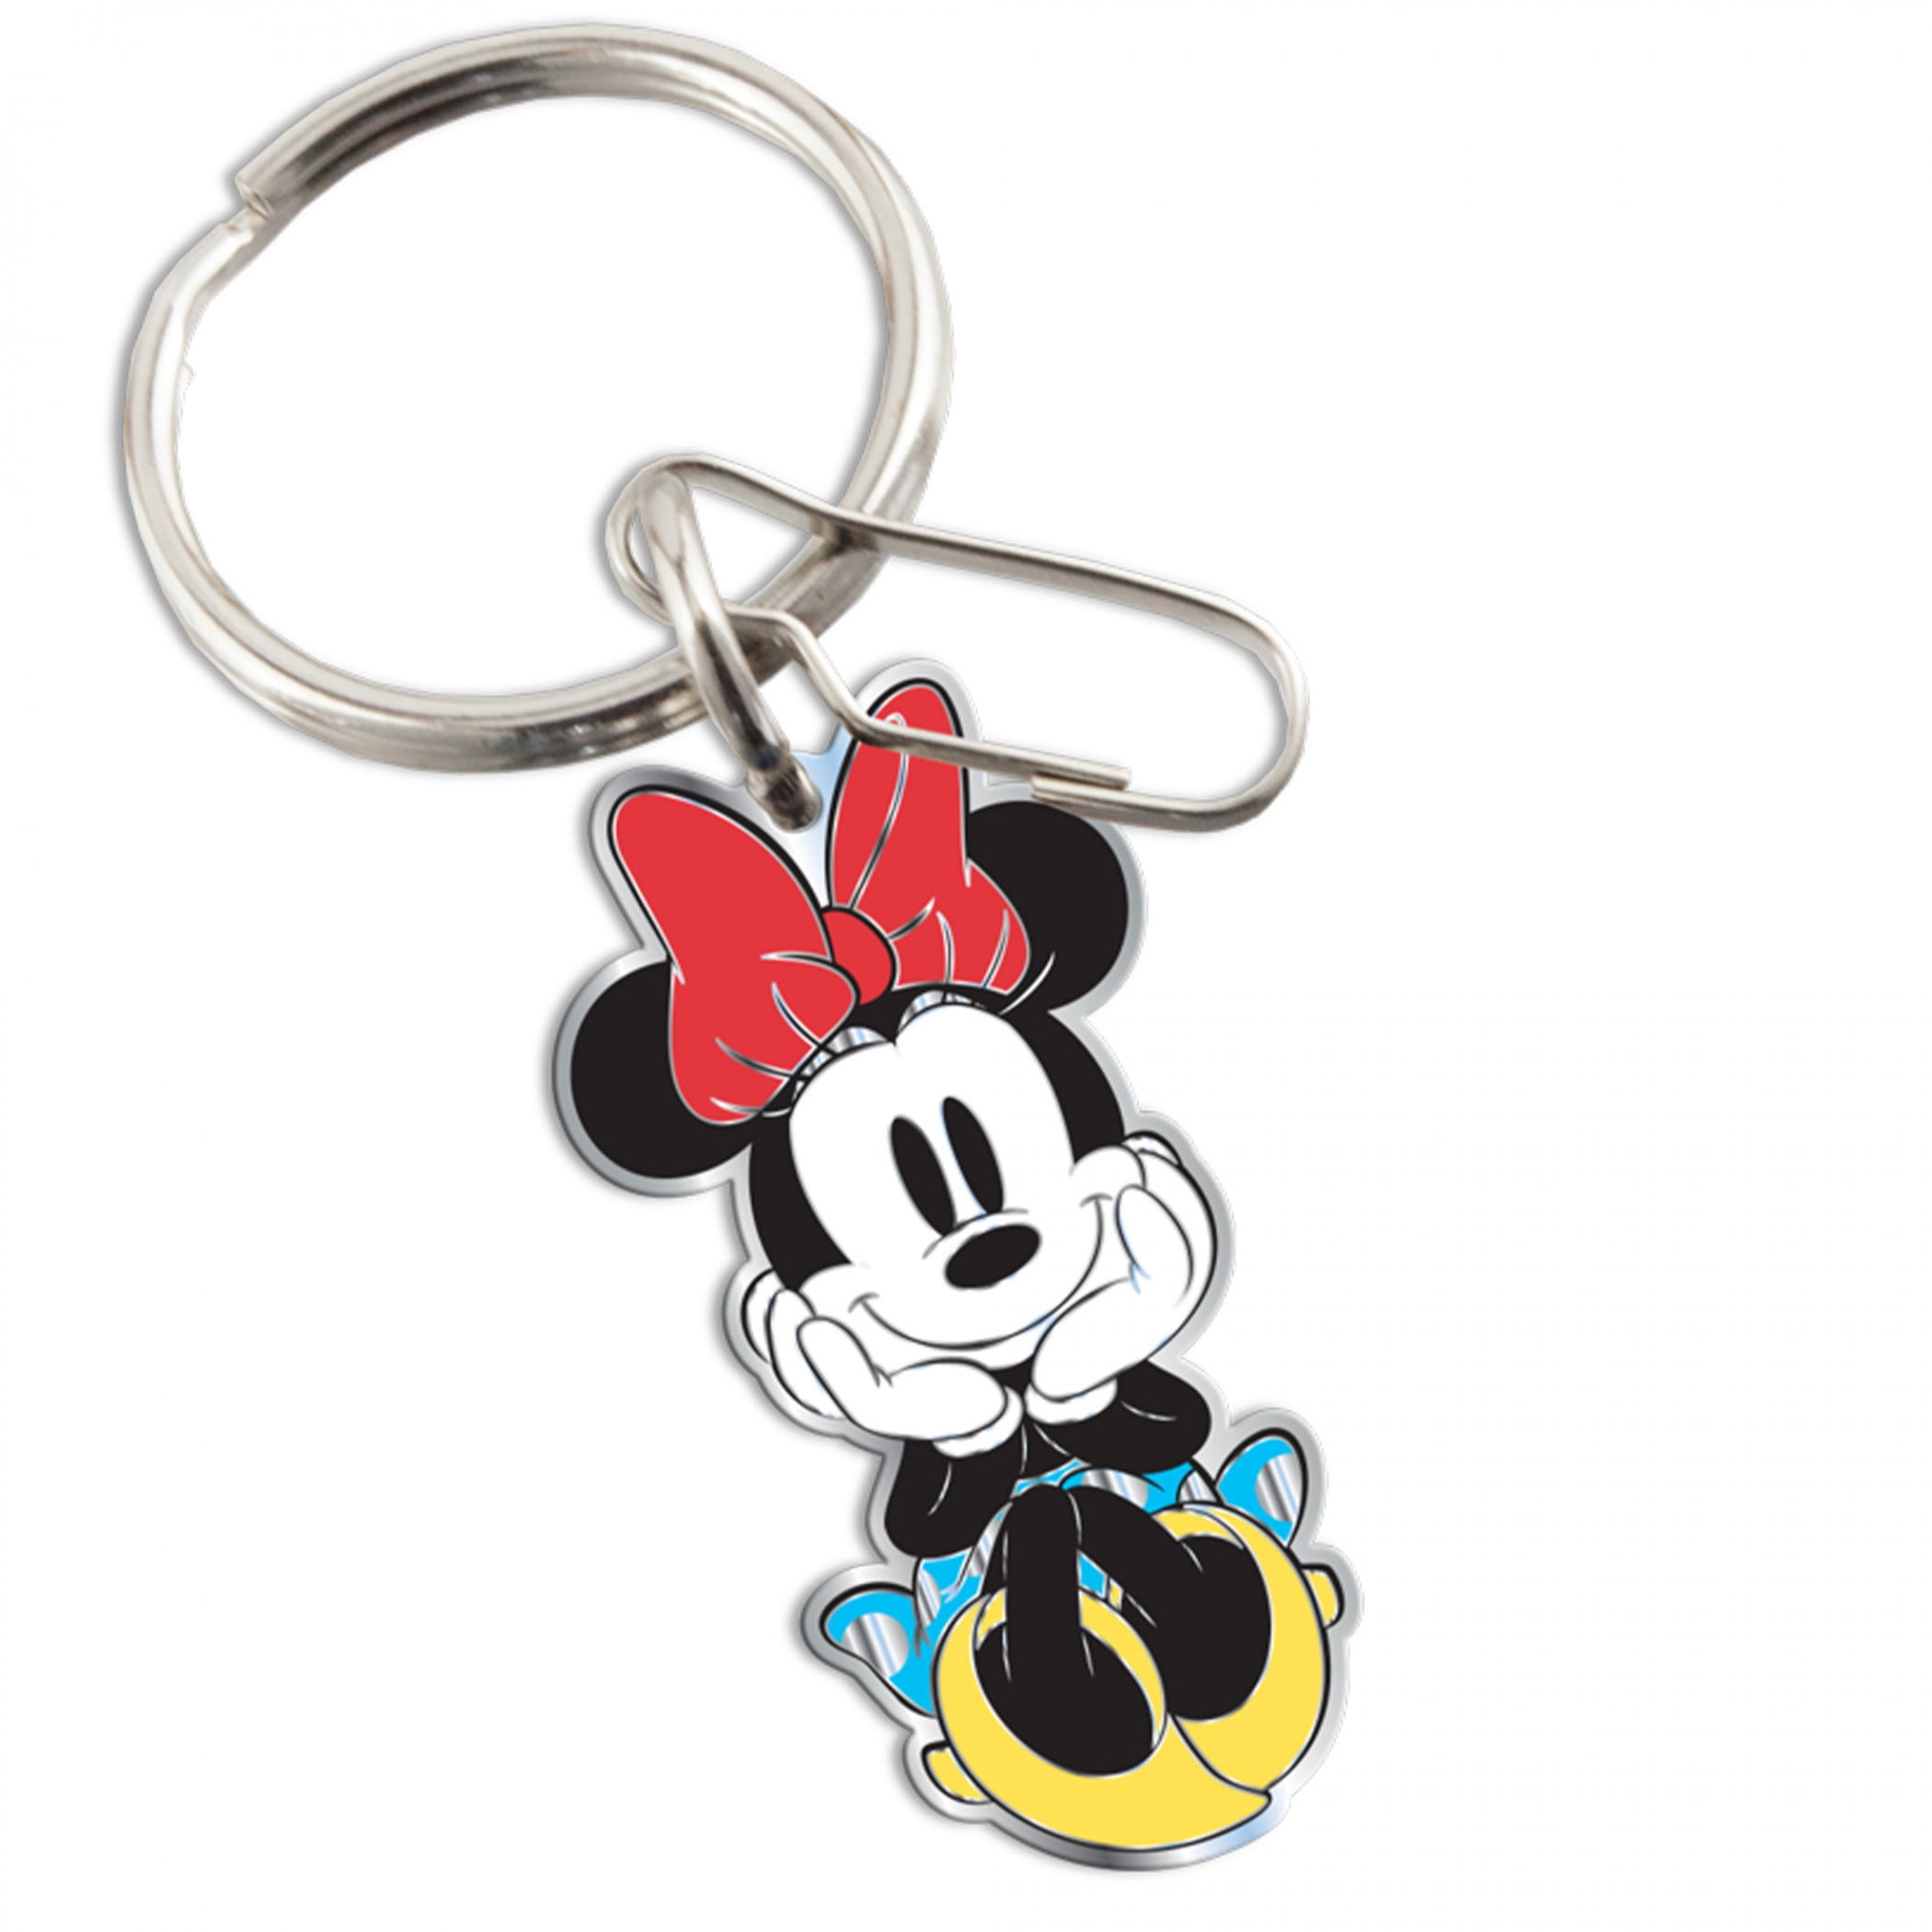 Minnie Mouse Key Cover Cap Keychain Key Ring PVC Key Case Gifts Toys Uk 